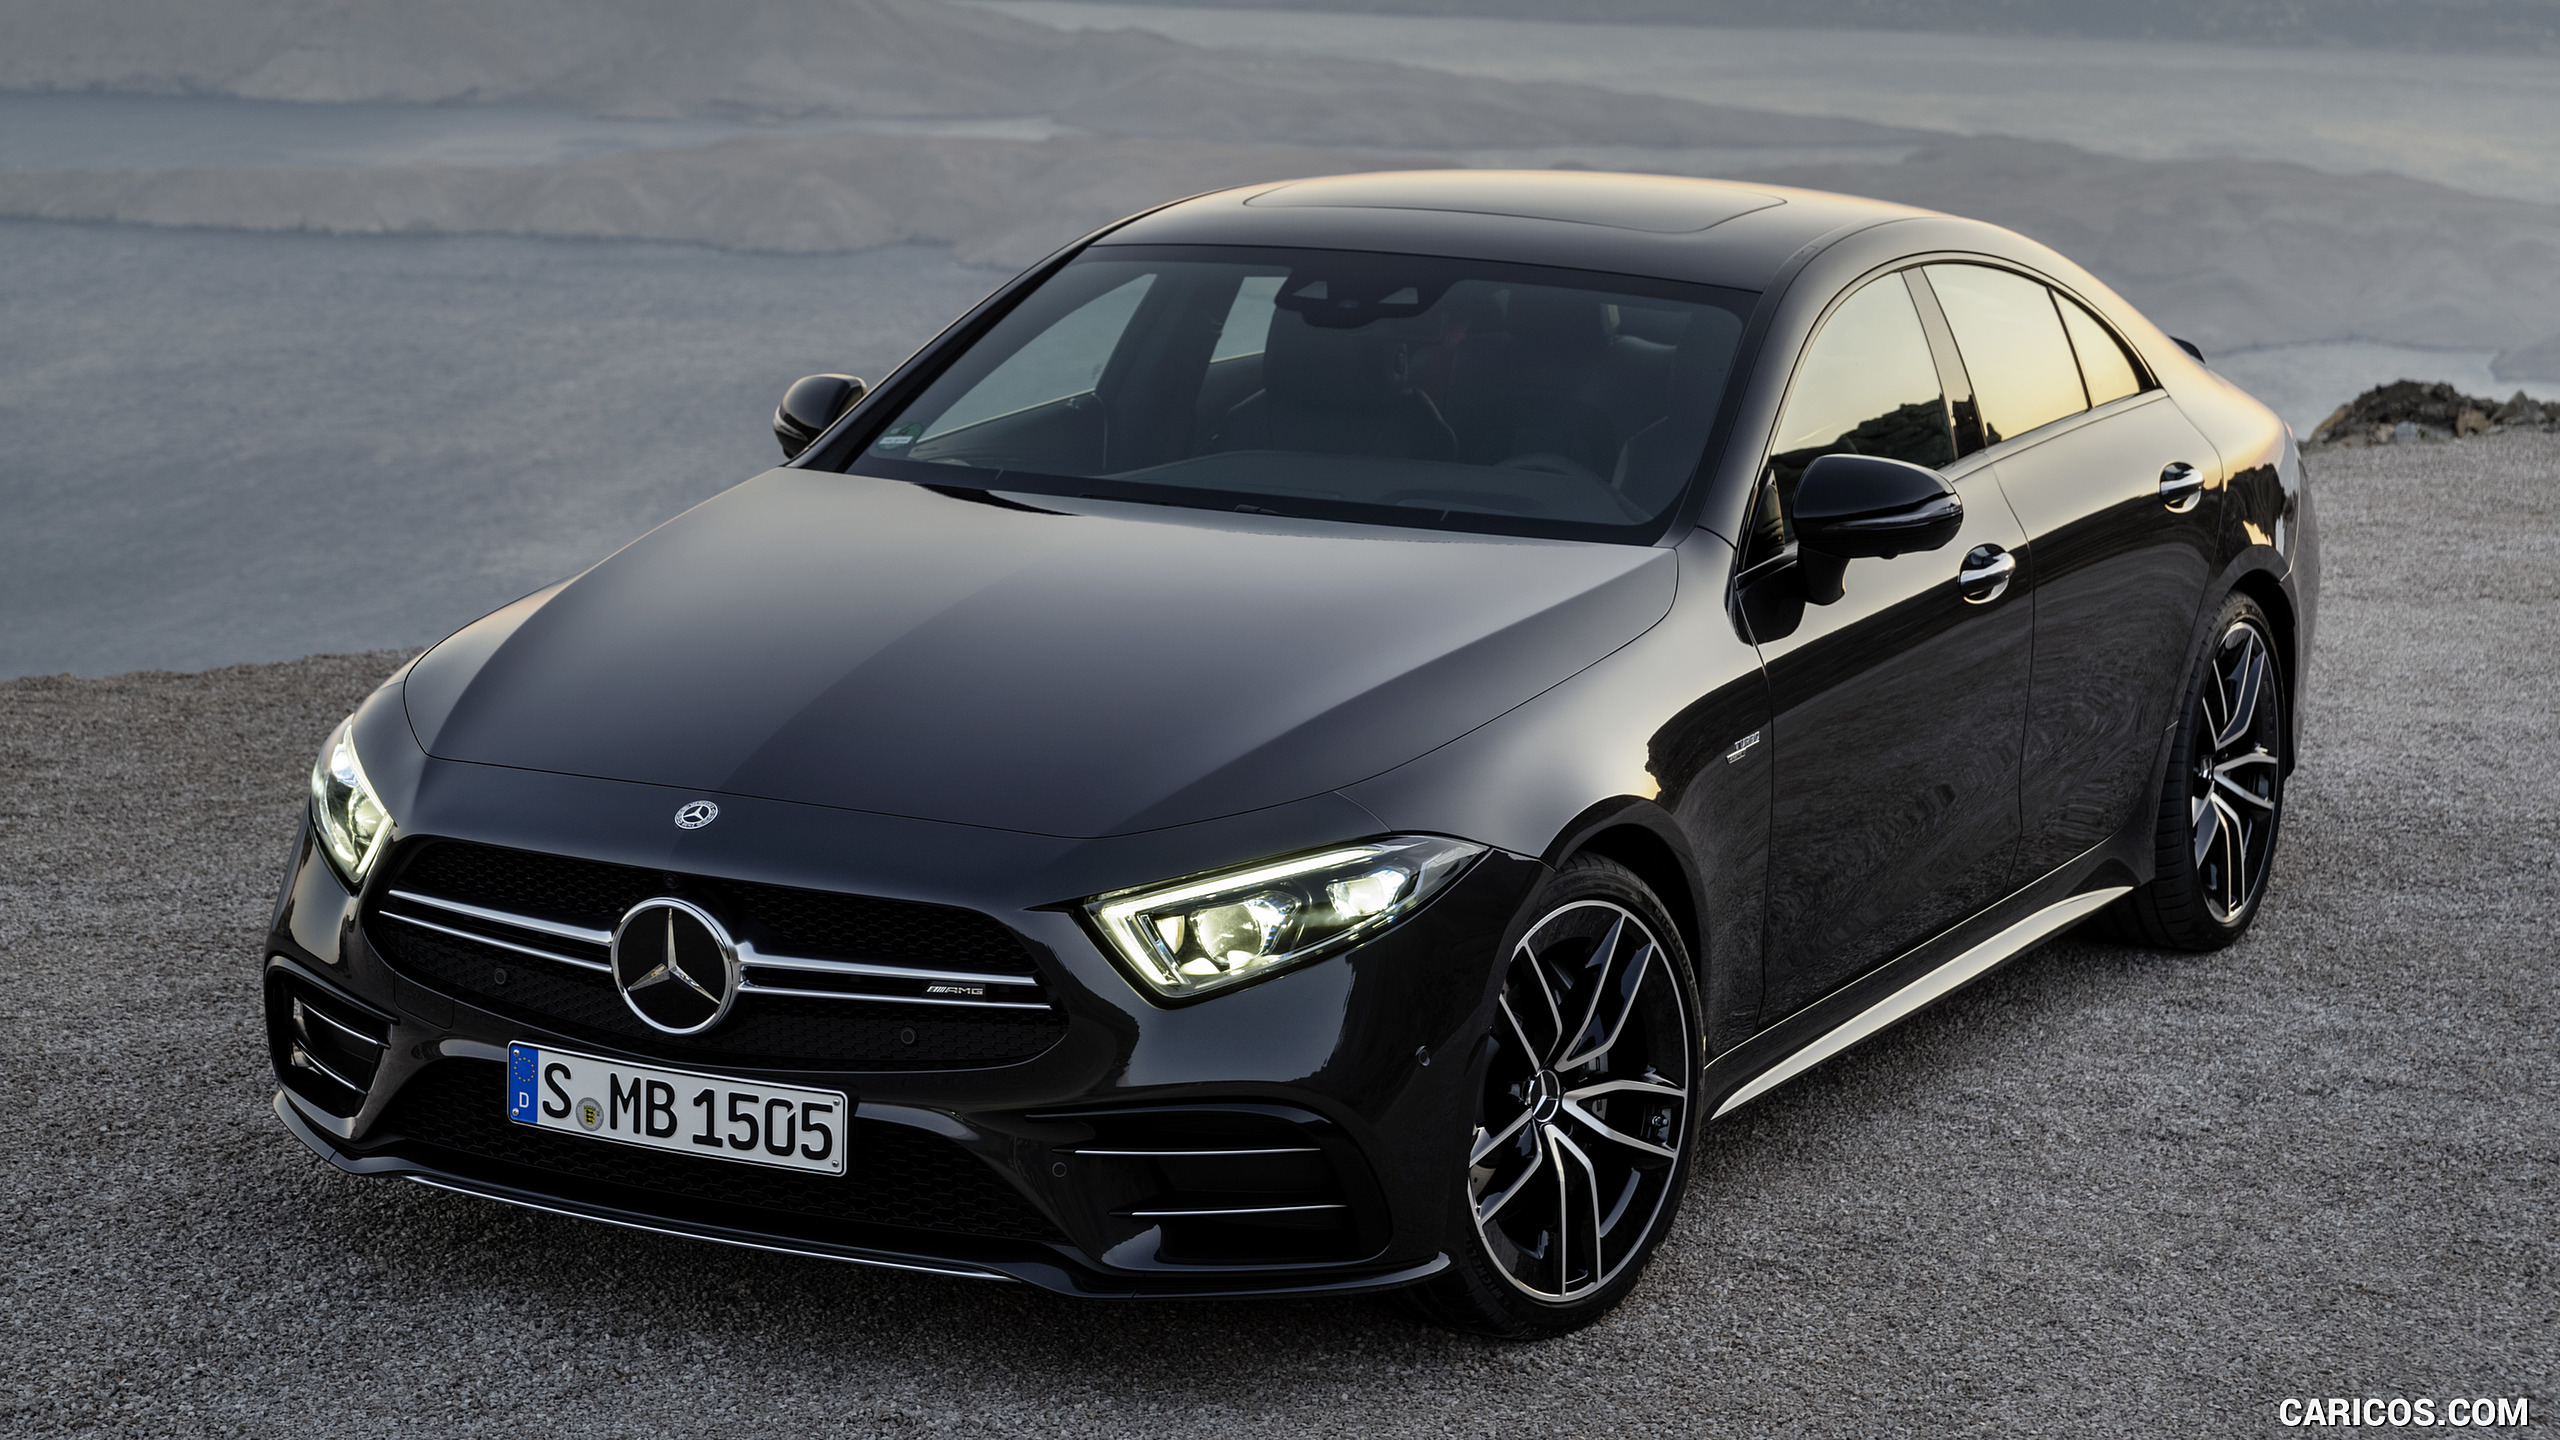 2019 Mercedes-AMG CLS 53 4MATIC+ - Front, #14 of 84